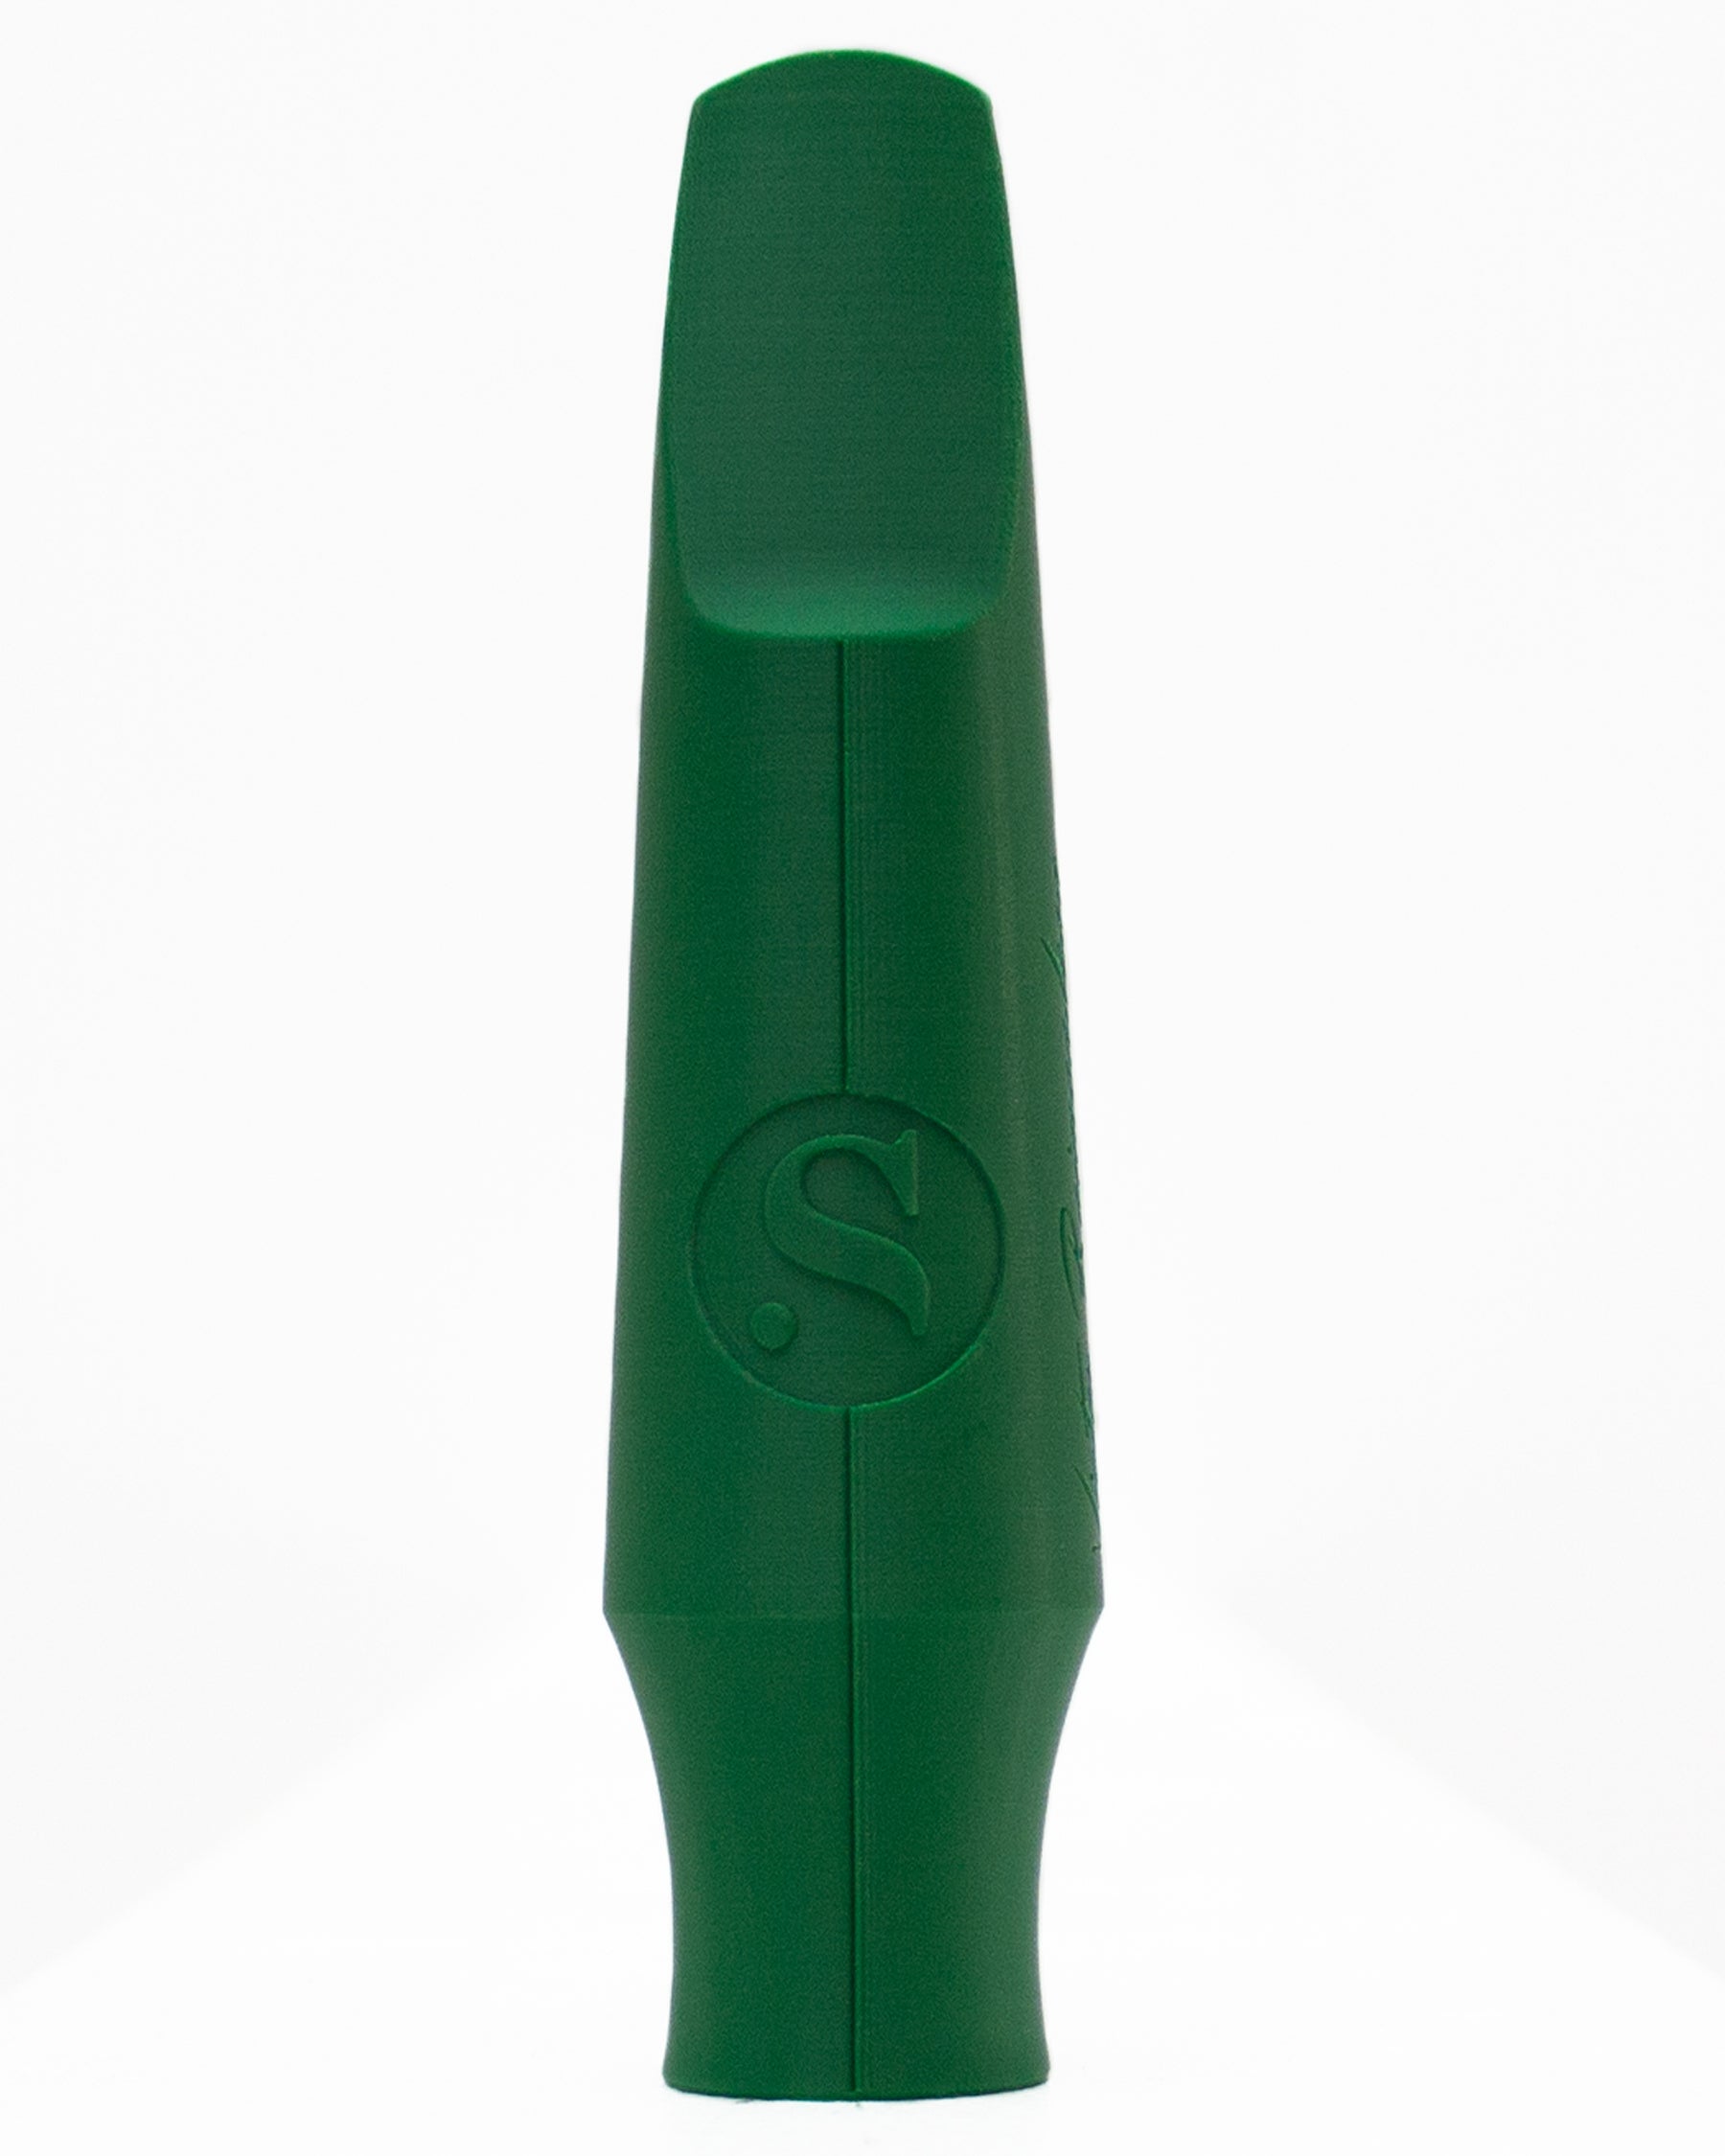 Baritone Signature Saxophone mouthpiece - Joe Trahan by Syos - 10 / Forest Green